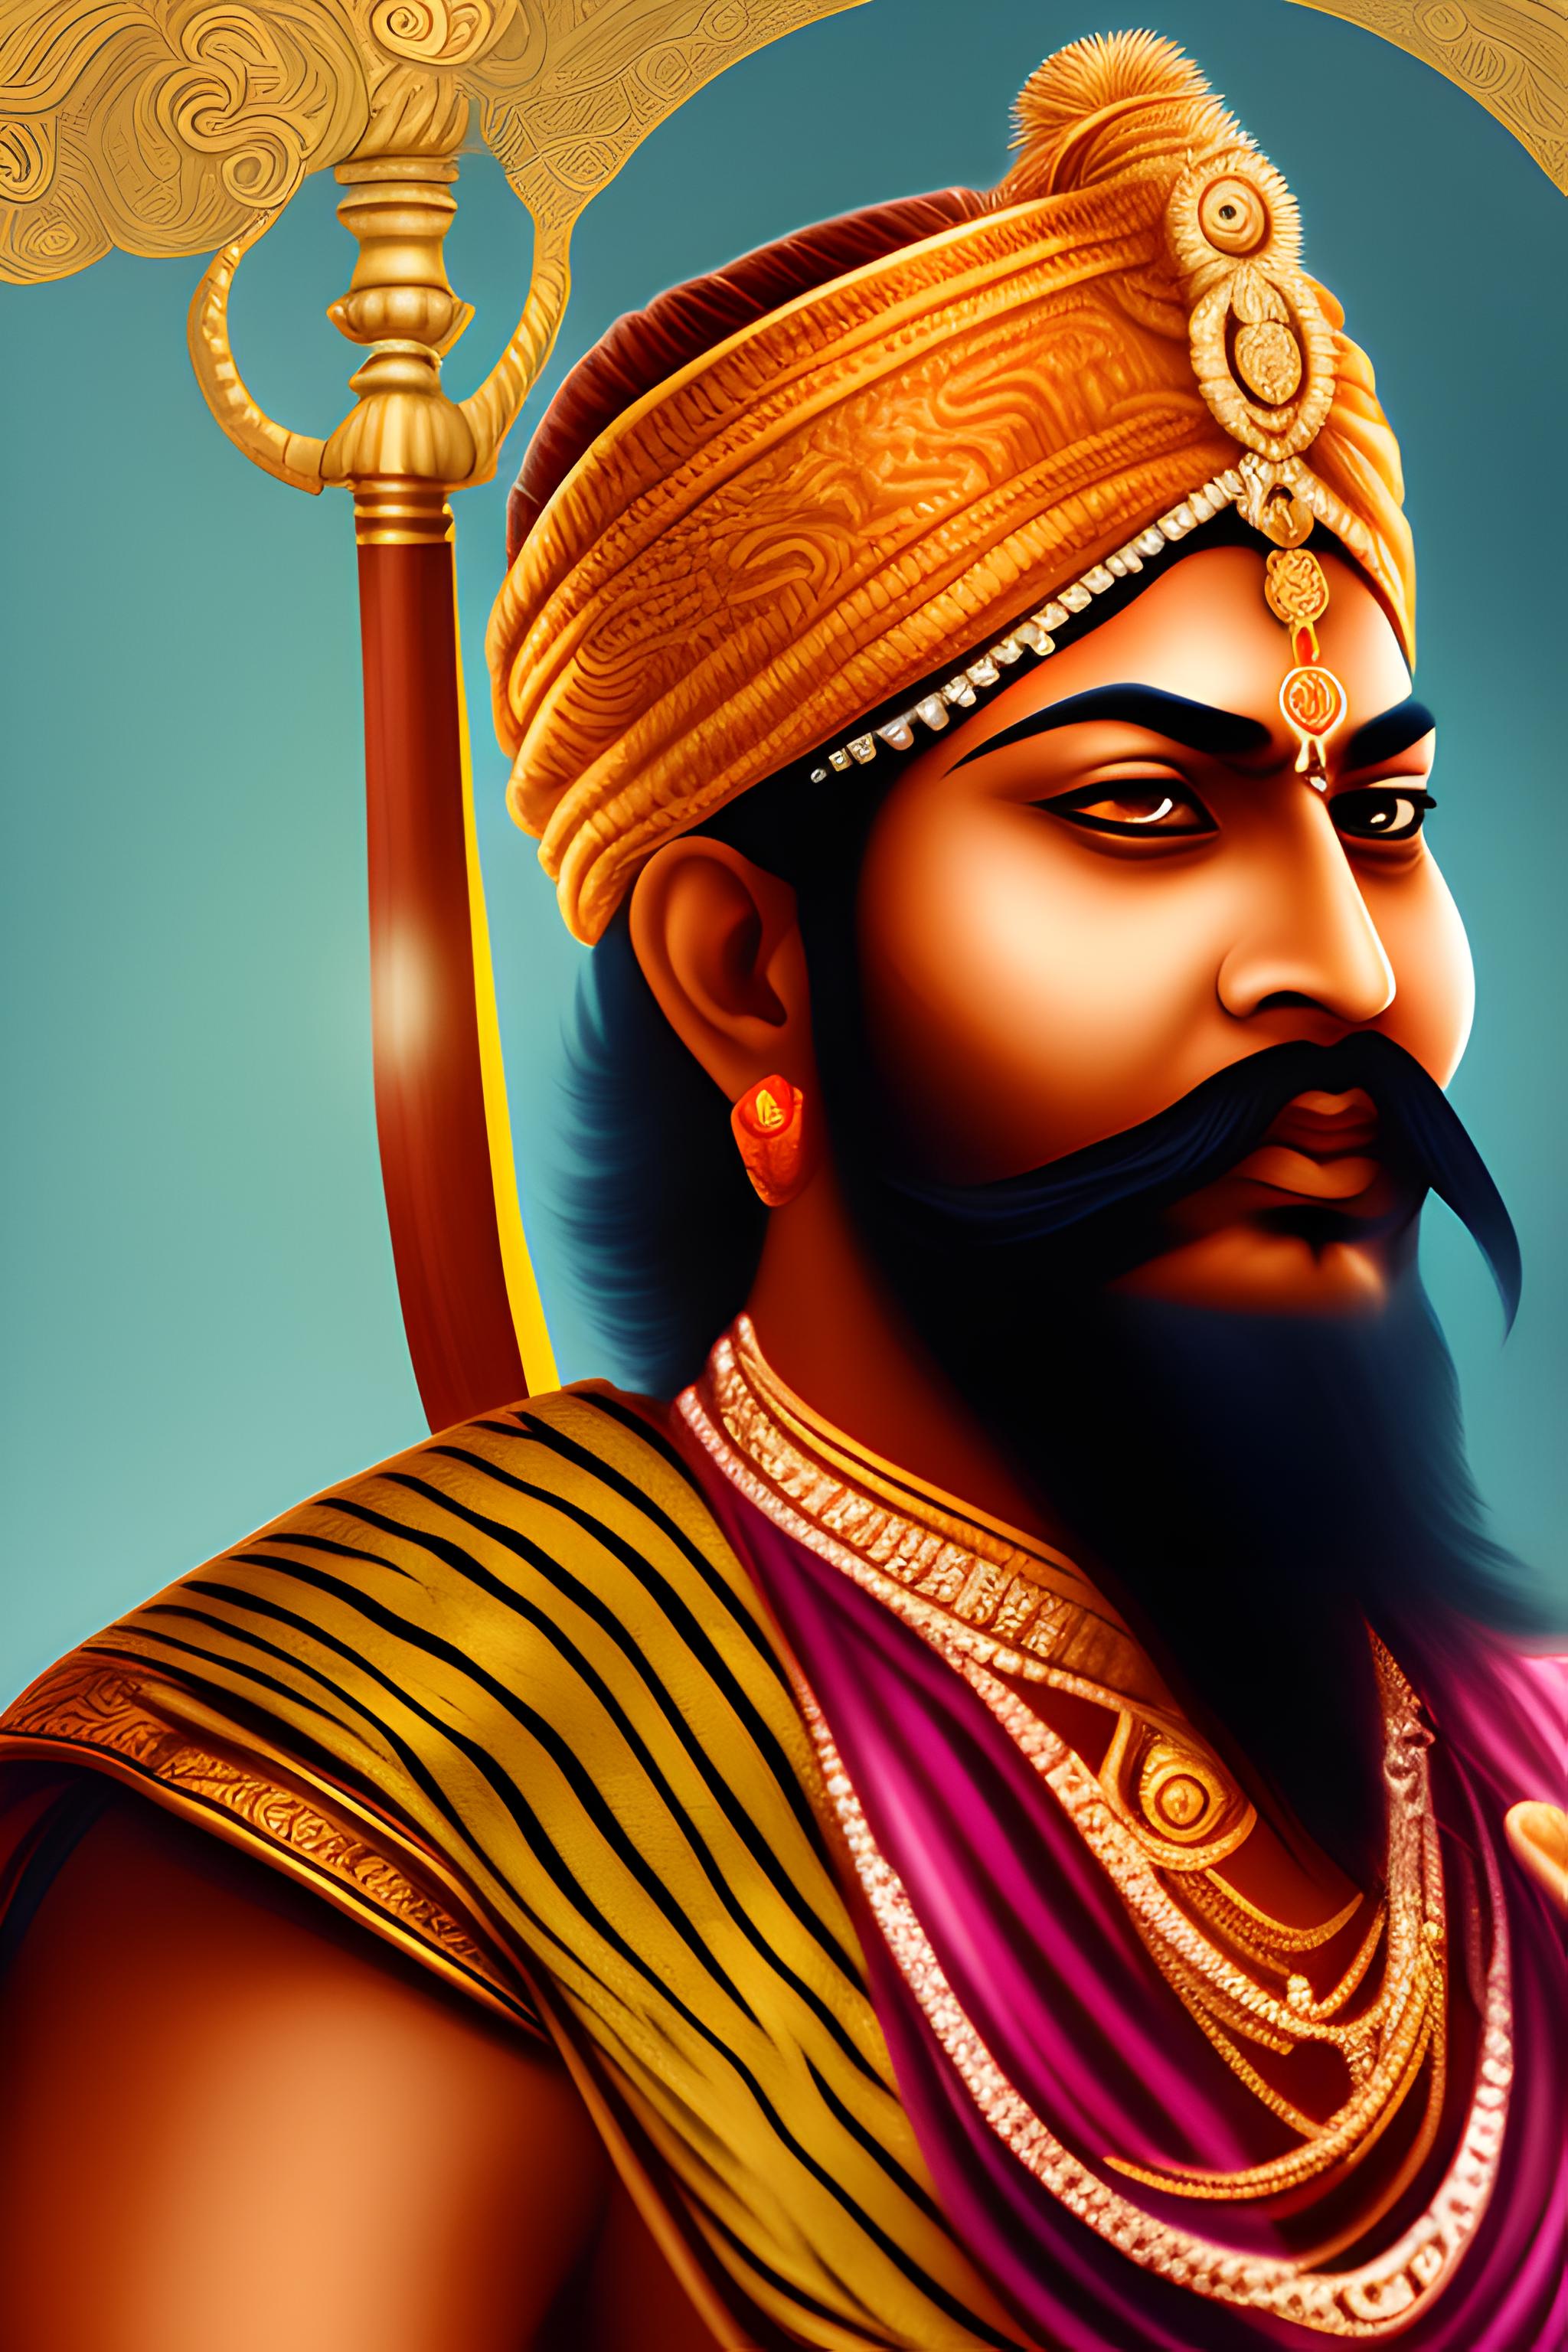 The great indian ruler chatrapati